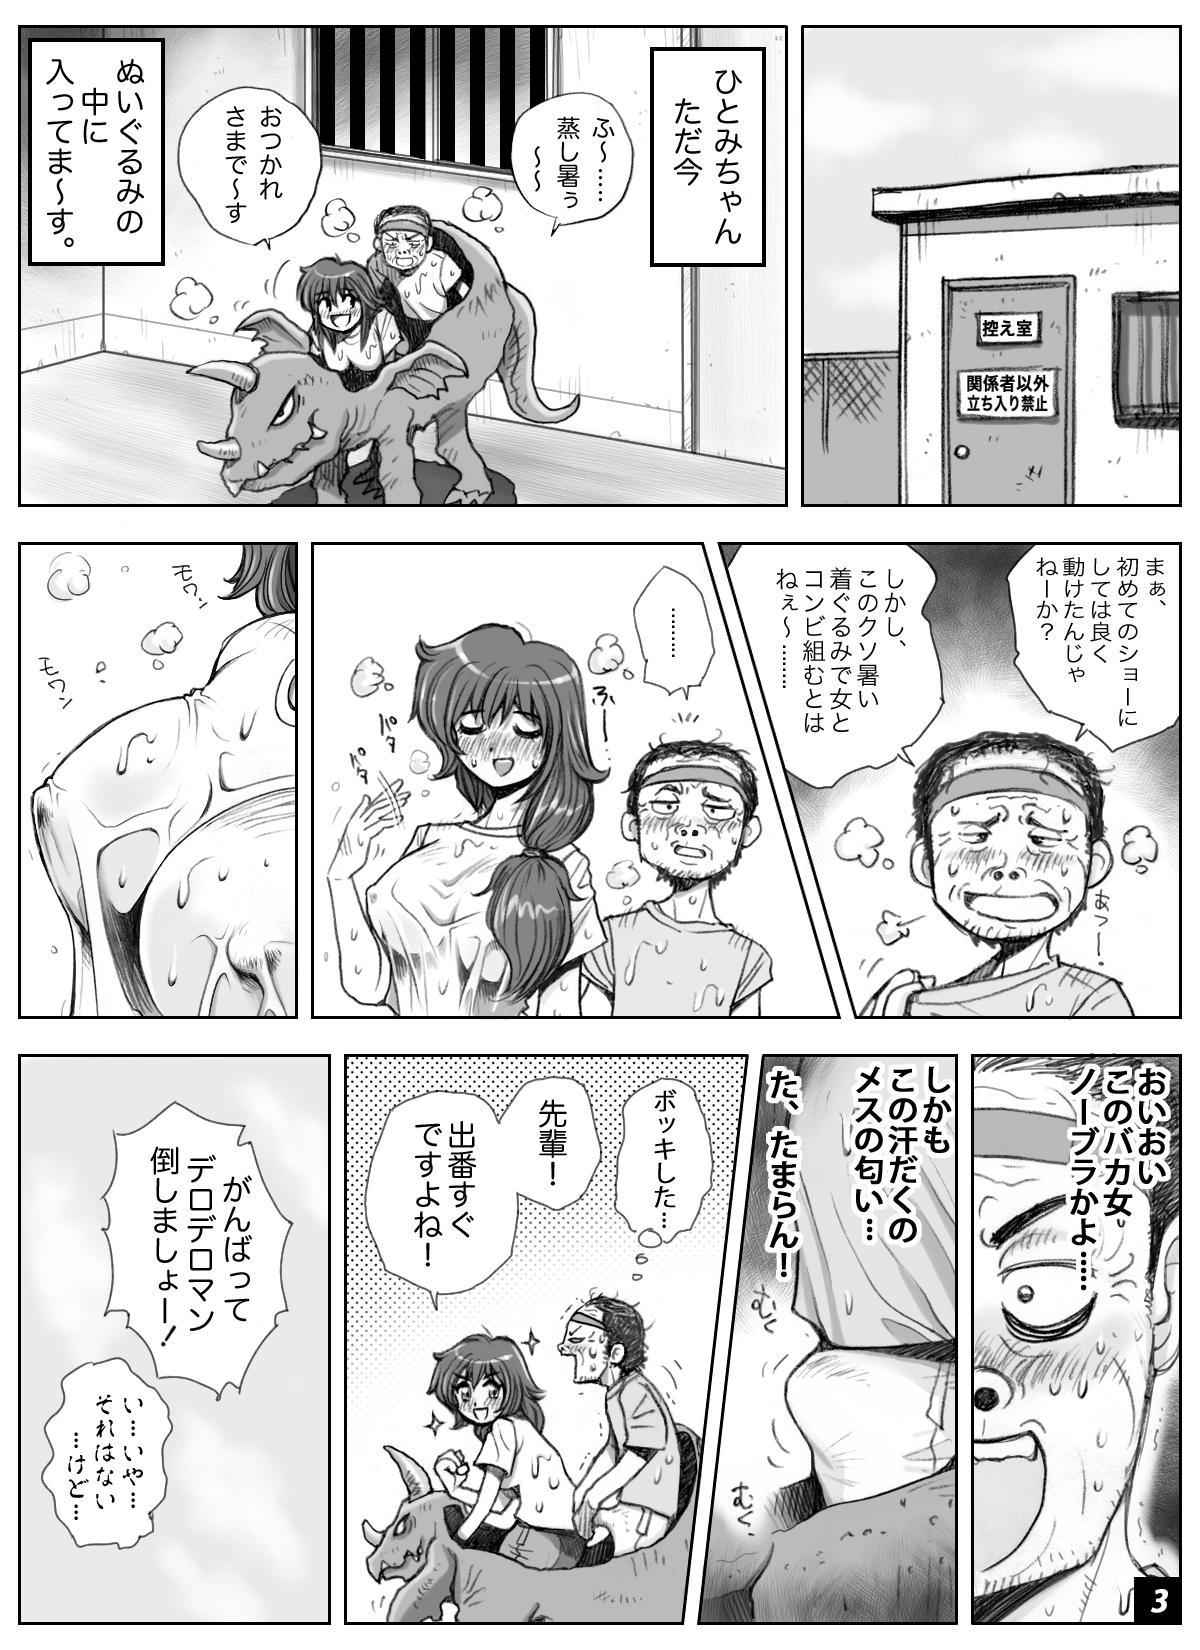 Feet ikeikeフリーター ひとみちゃん Vol.6 Transsexual - Page 3